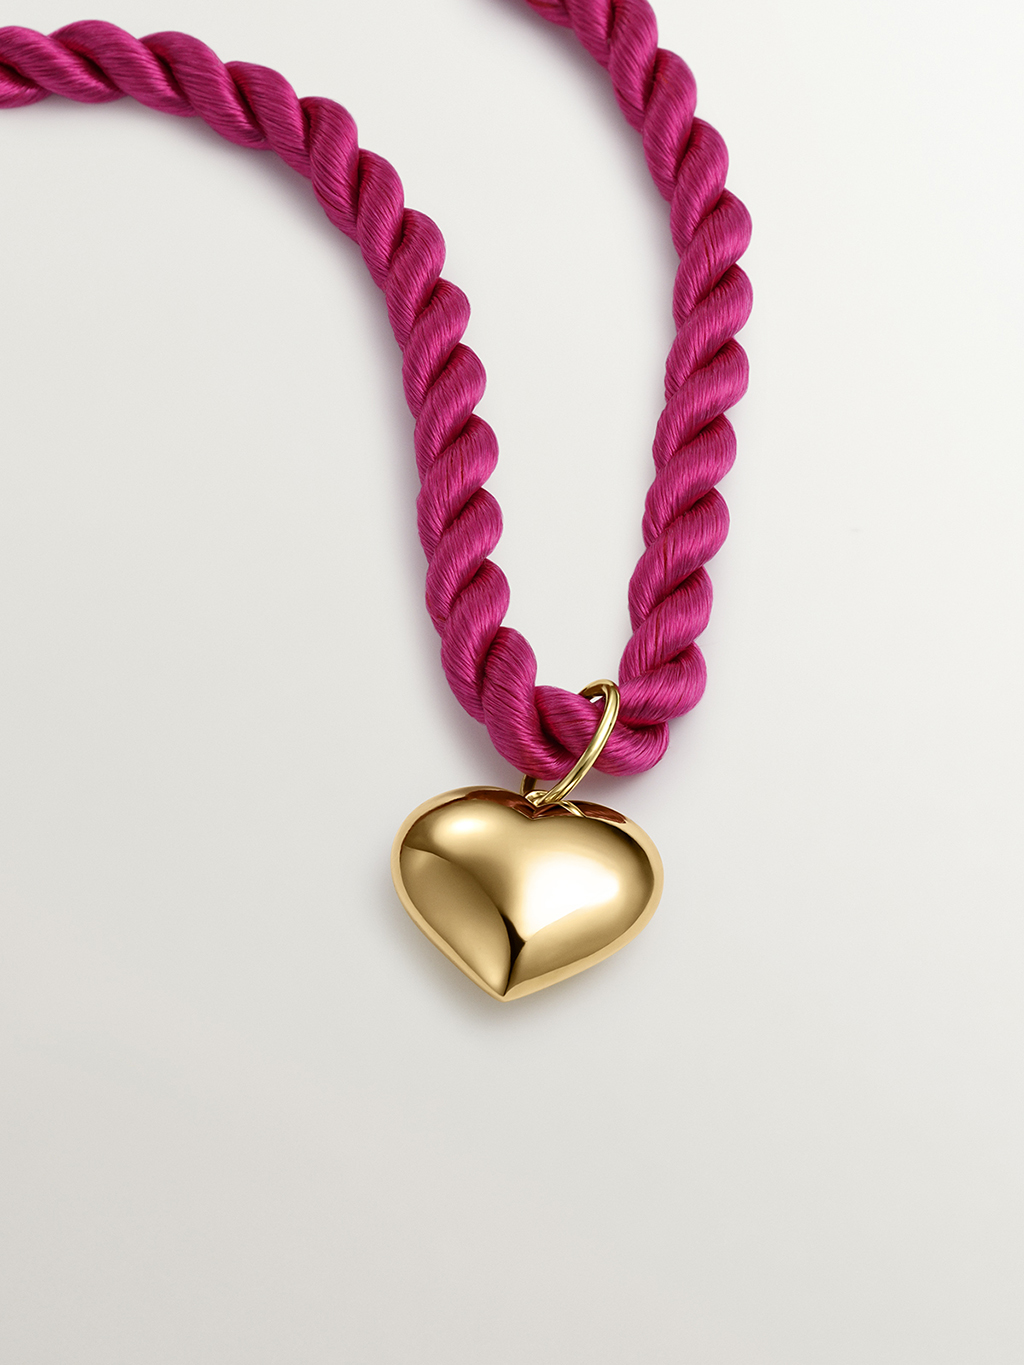 Aristocrazy: your love, your choice